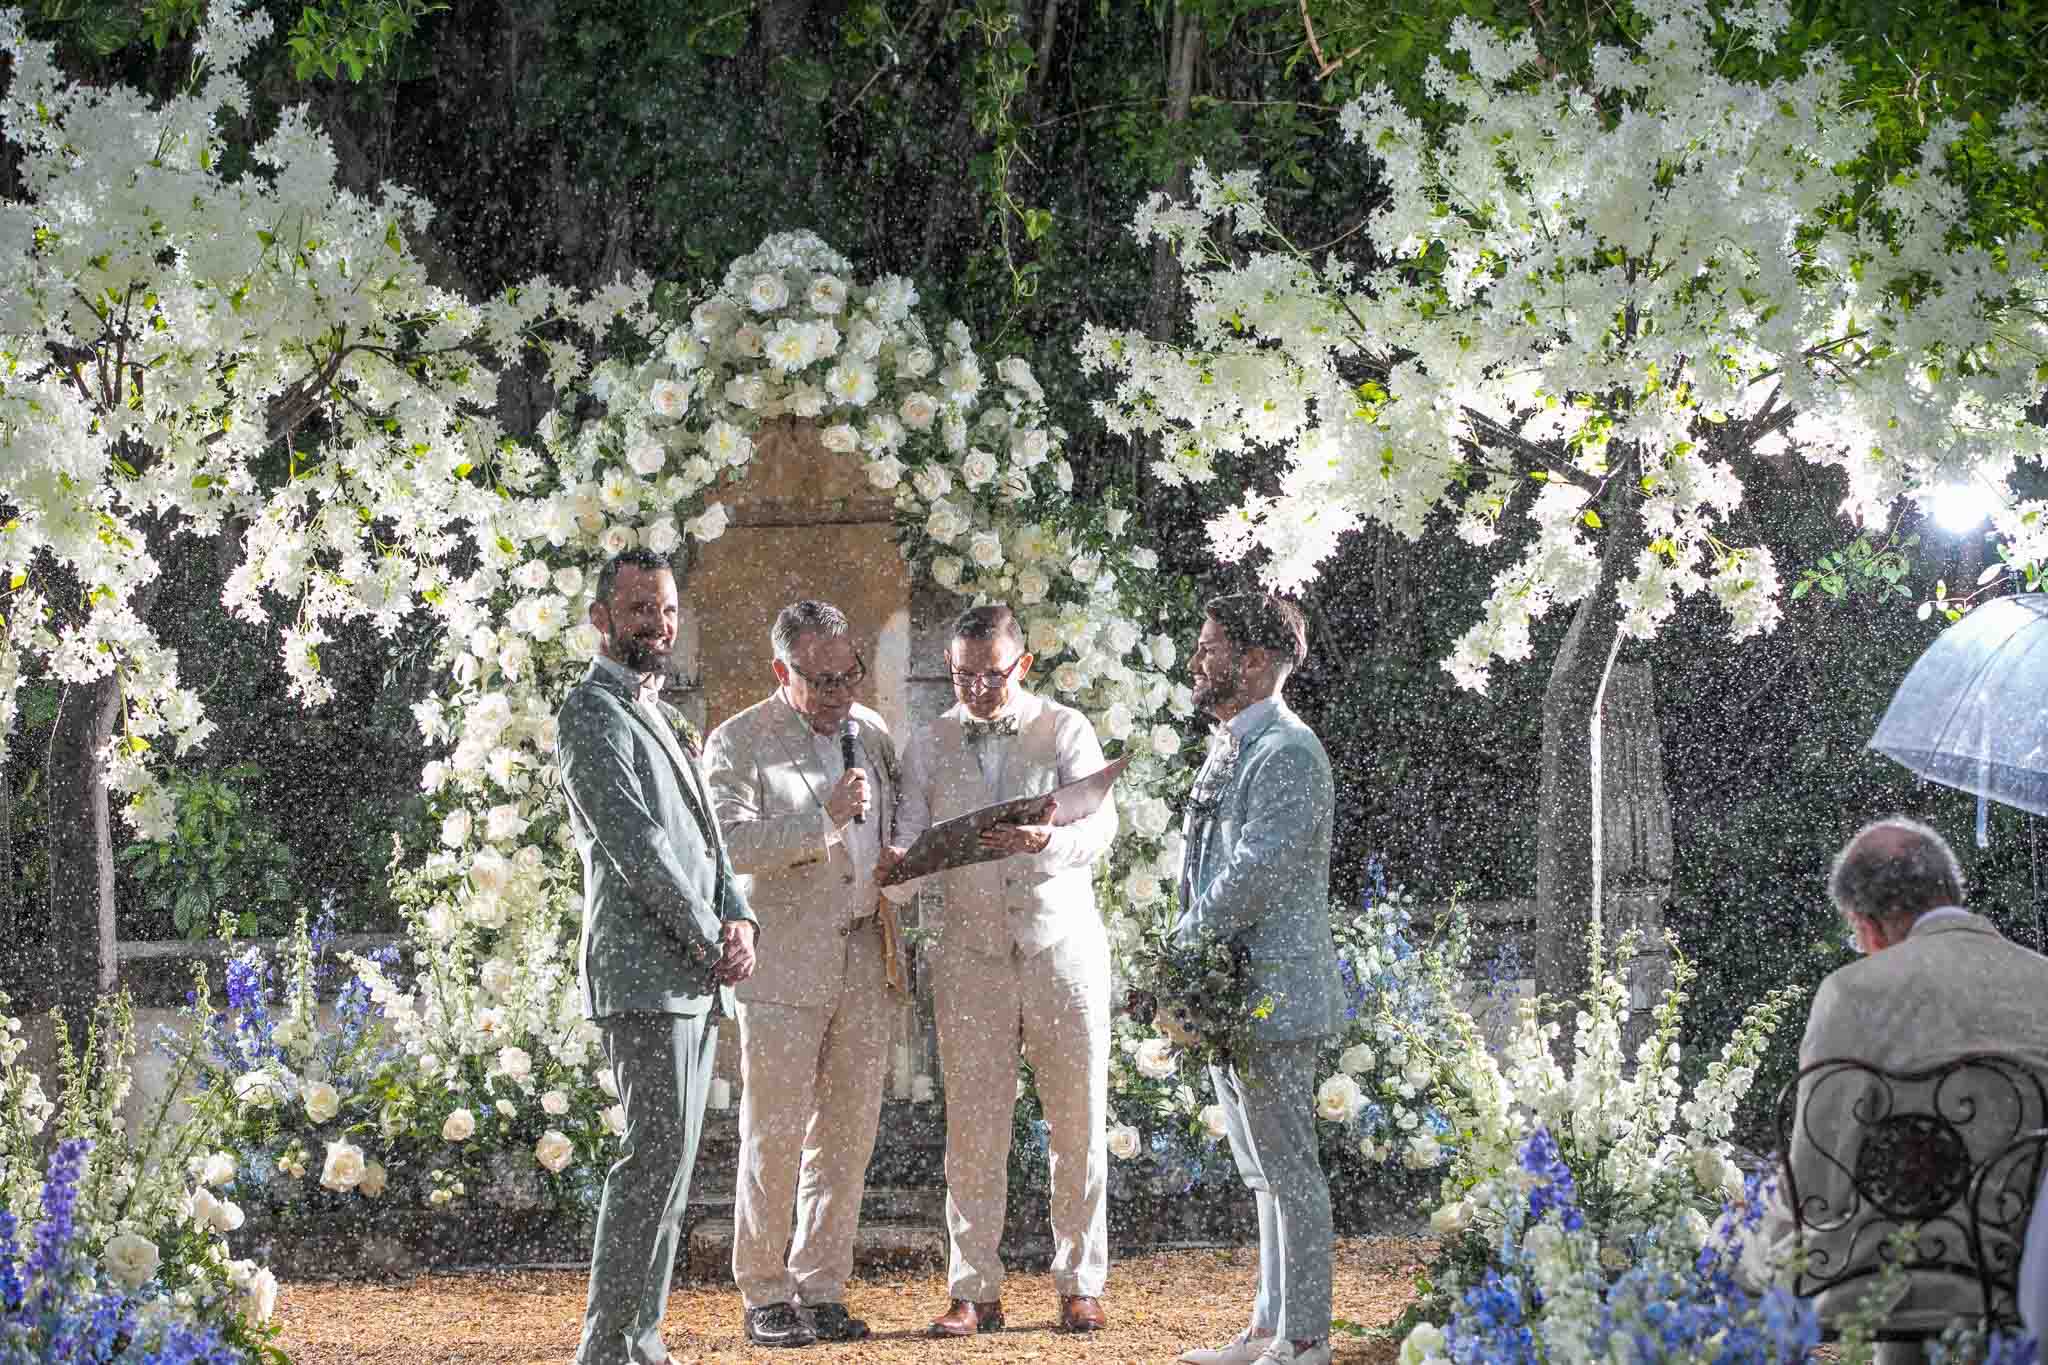 A pair of white grooms in light blue suits stand in the rain at their wedding ceremony, surrounded by white flowers and trees